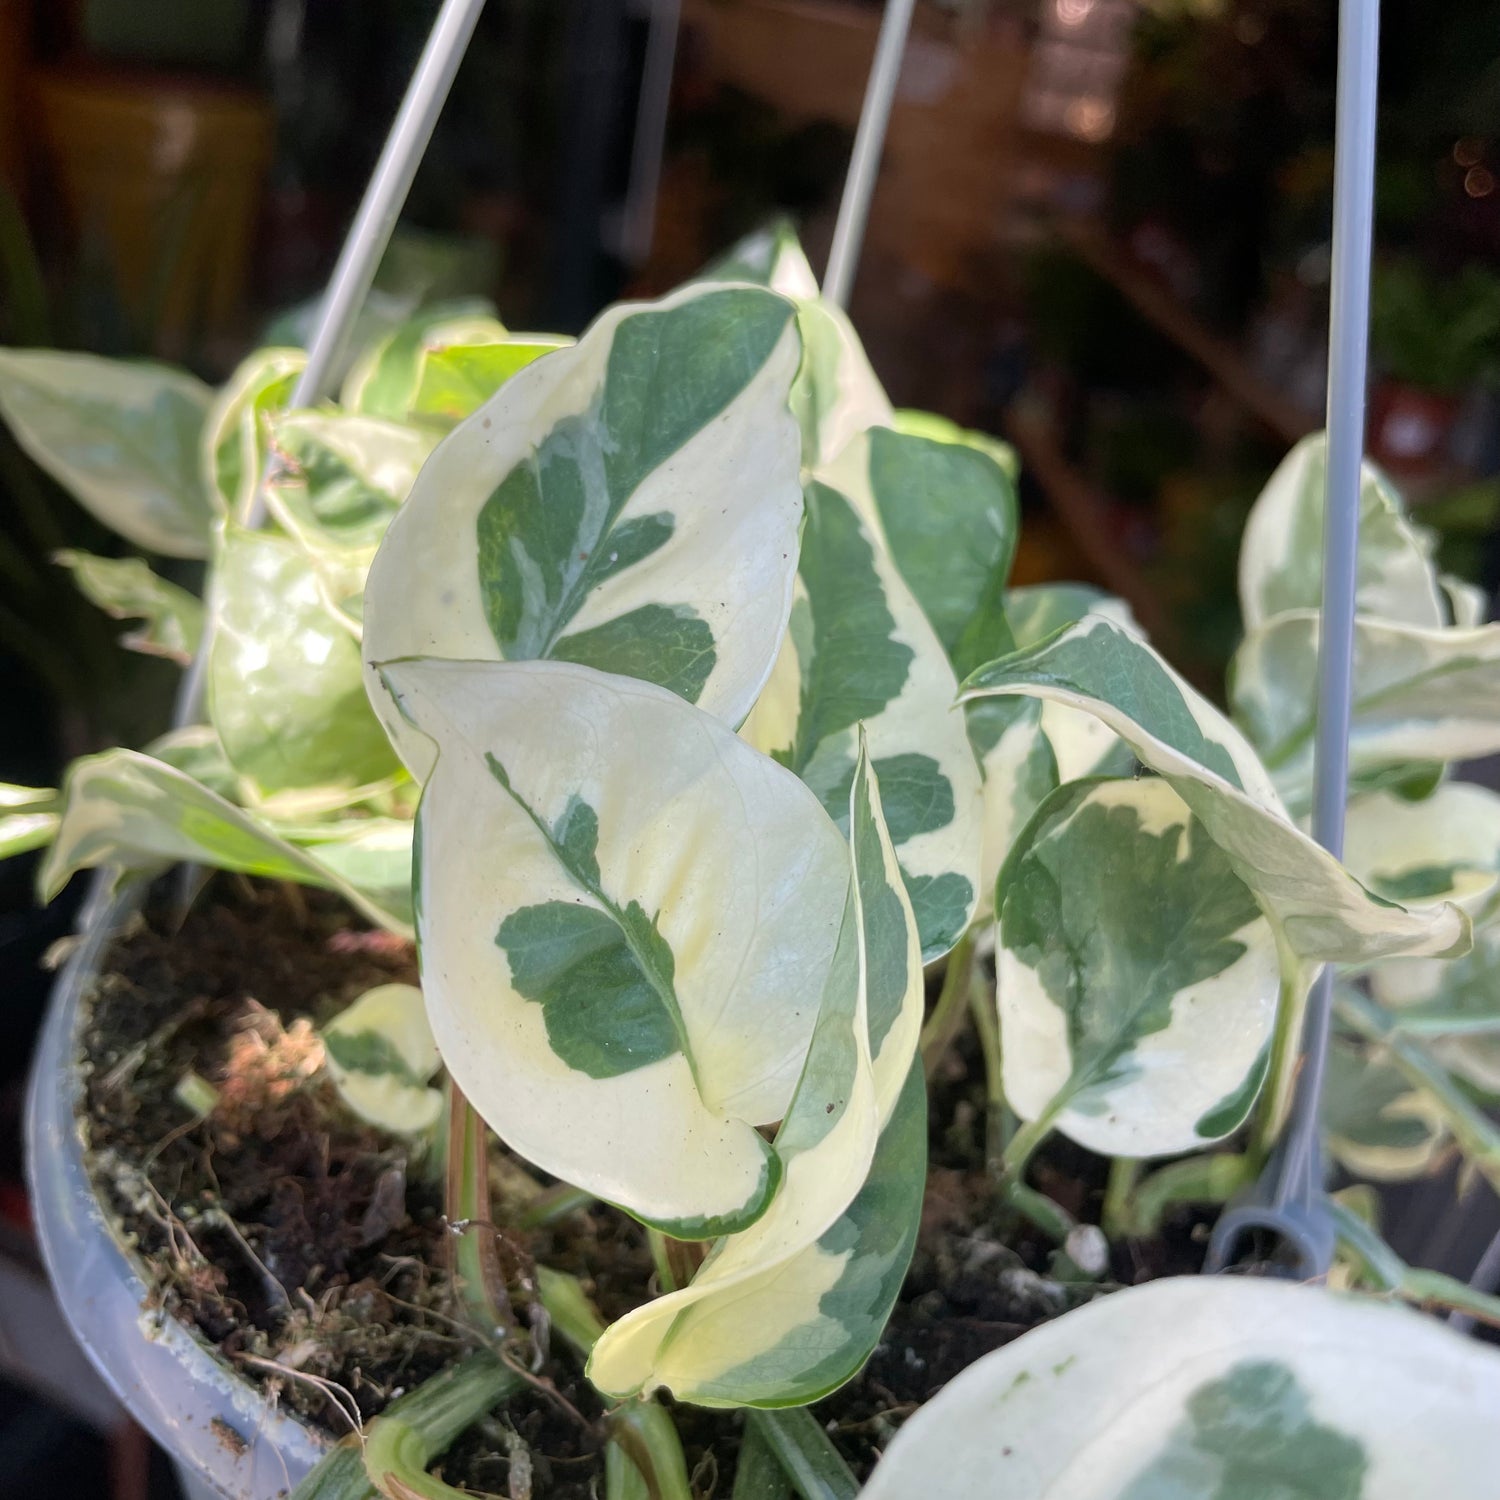 A Epipremnum Njoy plant also known as a pothos with green and white variegated leaves in front of Urban Tropicana&